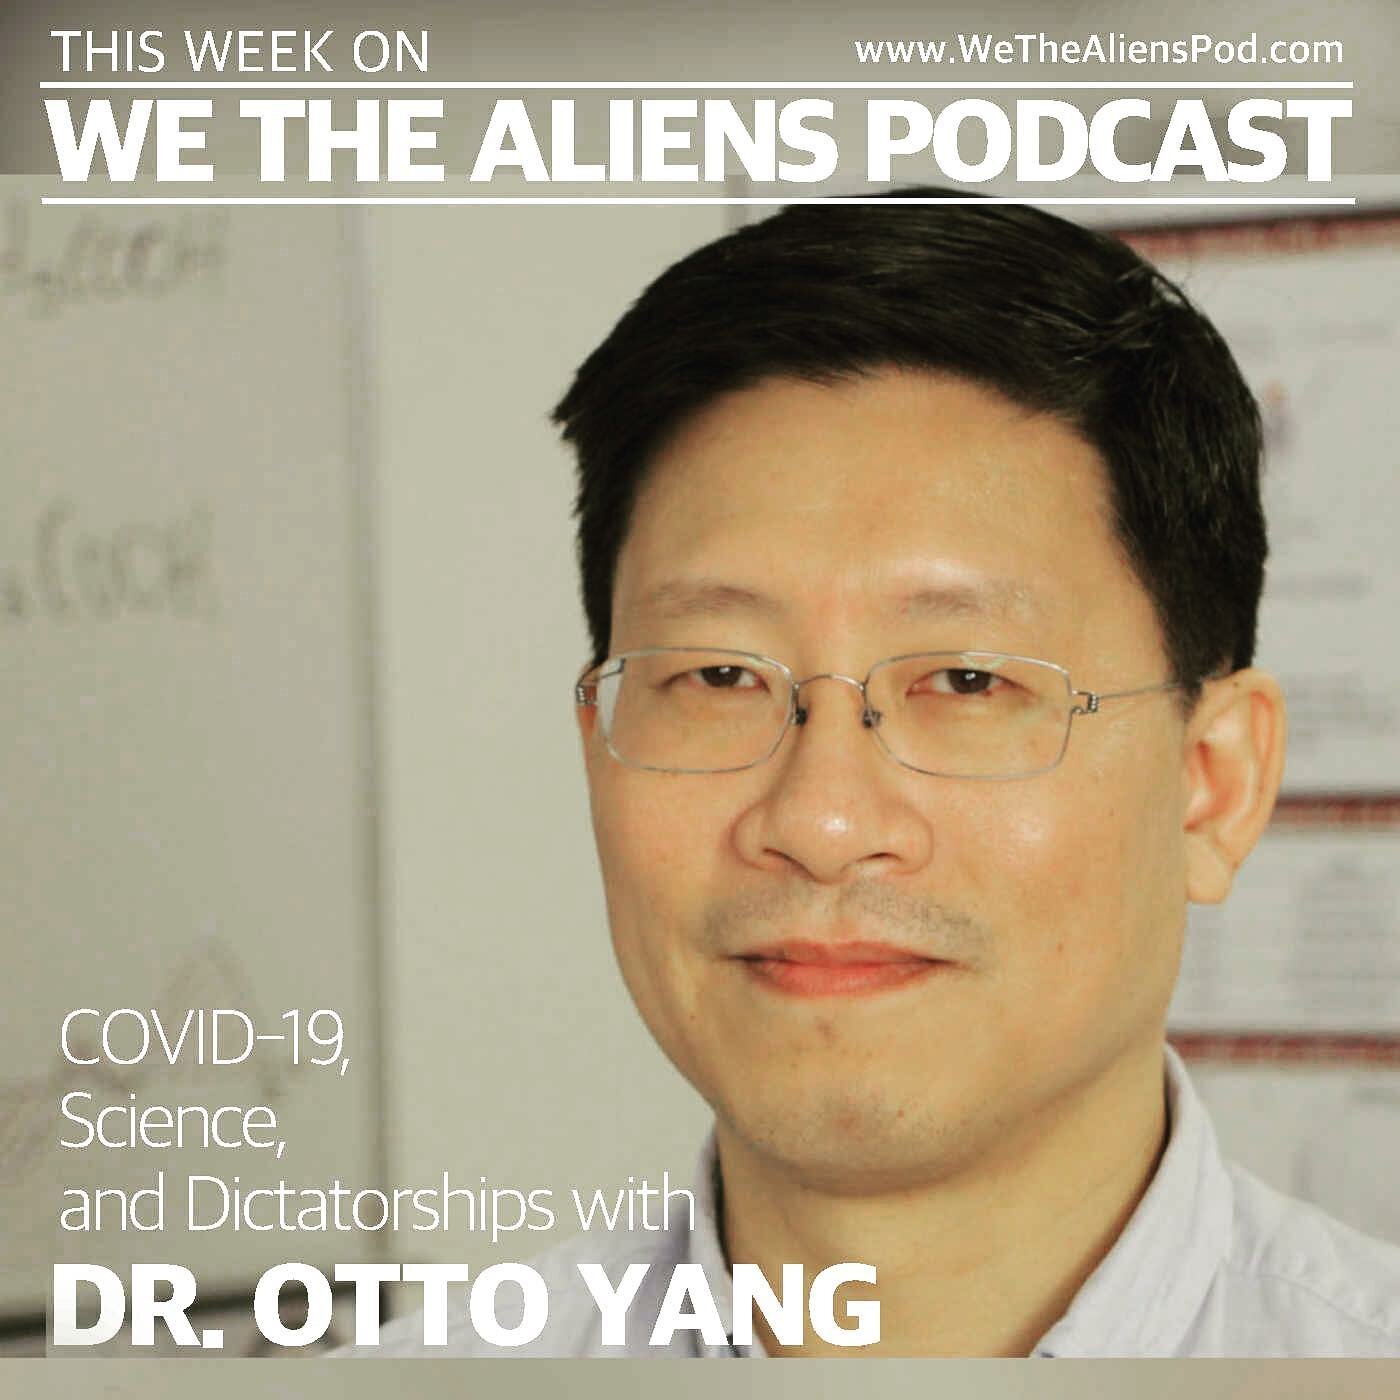 💥GWYNETH PALTROW&rsquo;s #GOOP was Dr.Yang&rsquo;s previous podcast appearance. You will not guess why. 🤯
.
You&rsquo;ll have to listen to find out.
.
THREE STATEMENTS OUT OF CONTEXT
.
In this episode of We The Aliens Podcast Dr. Otto Yang says -
-